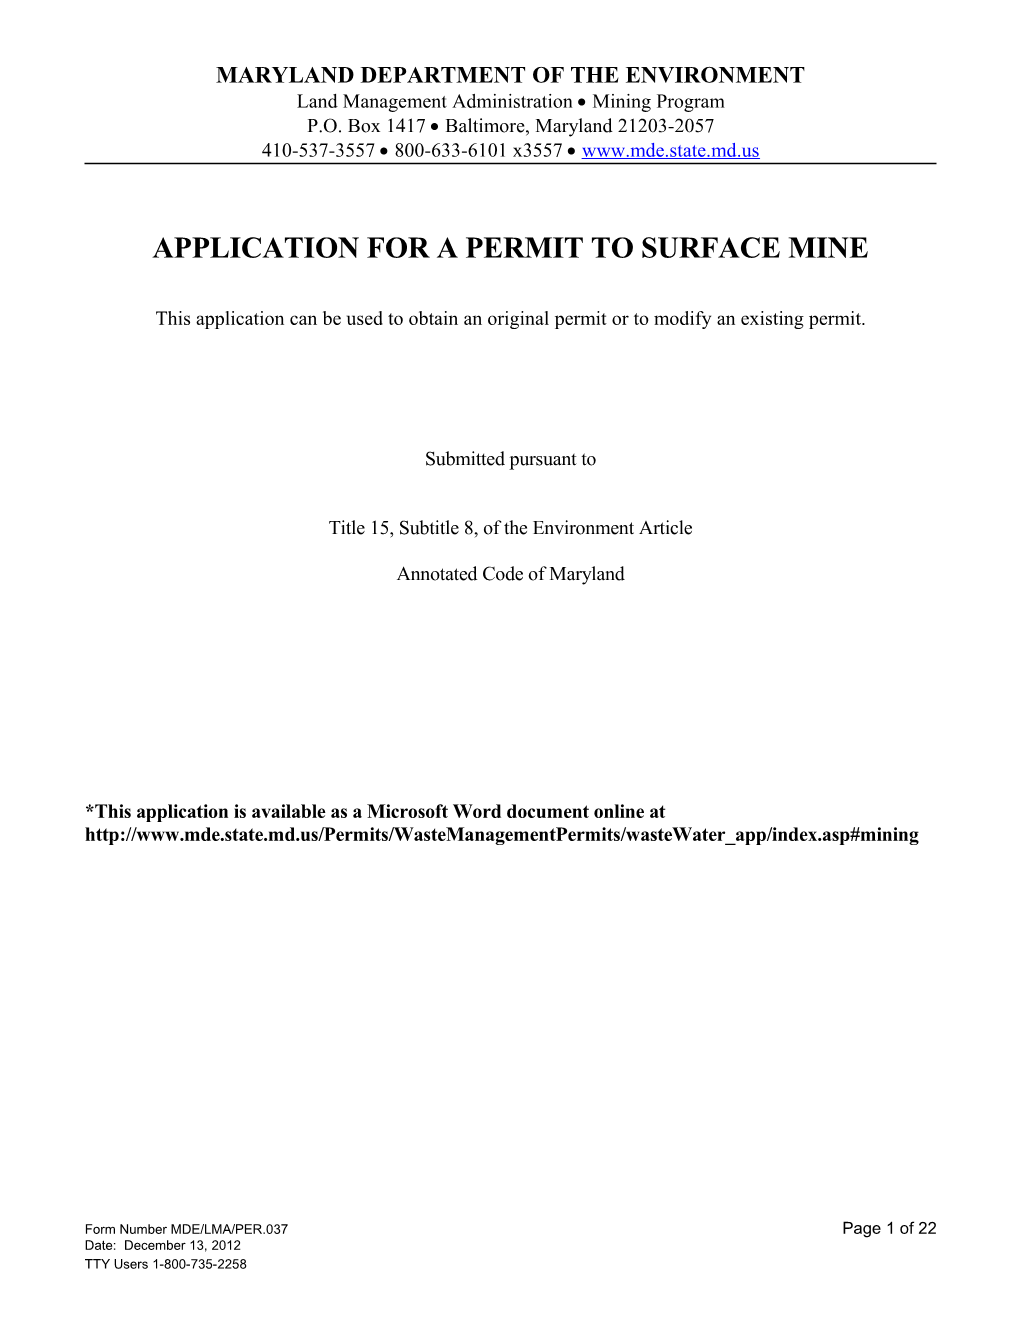 Application for a Permit to Surface Mine